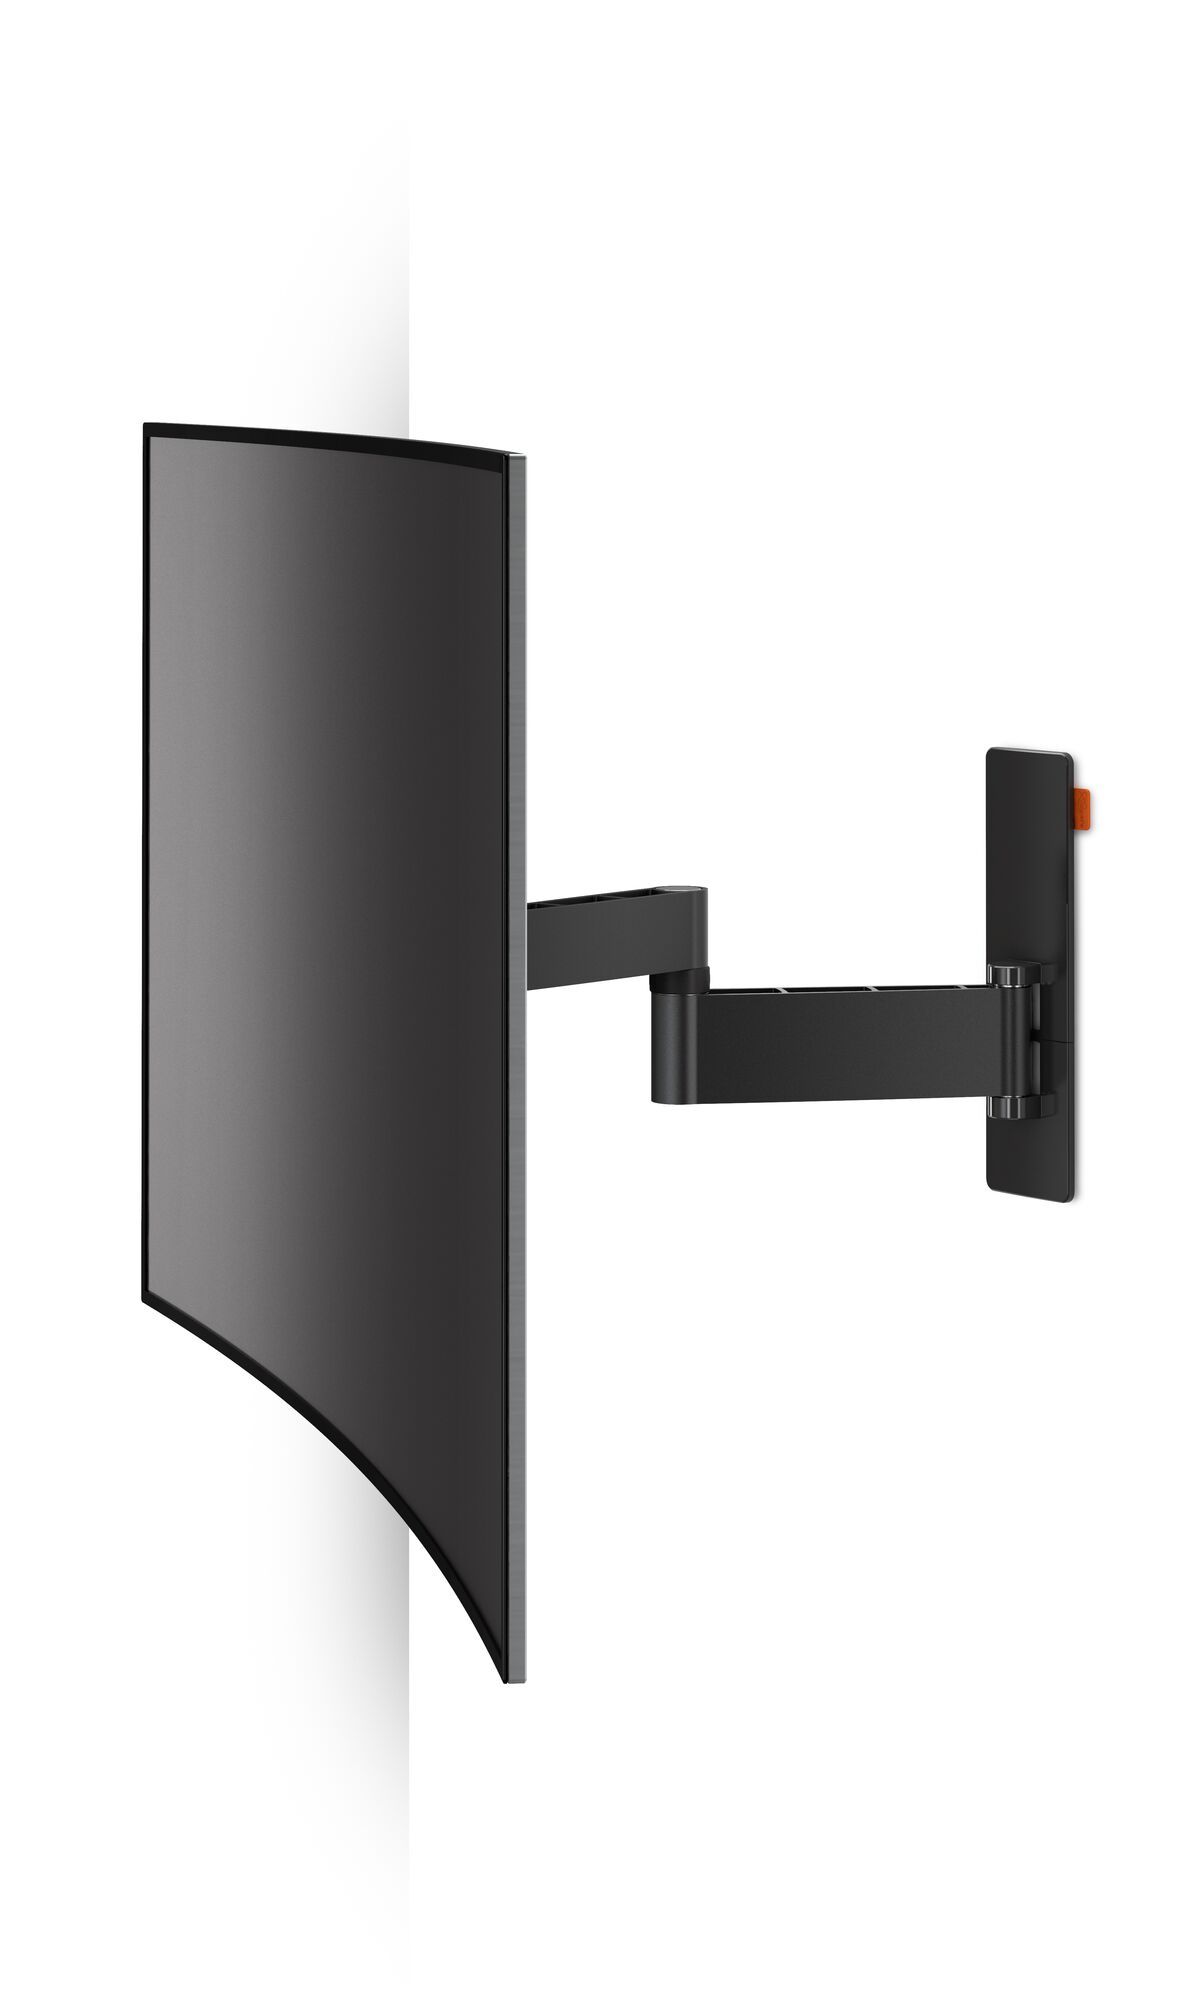 Vogel's WALL 2245 Full-Motion TV Wall Mount (black) - Suitable for 32 up to 55 inch TVs - Full motion (up to 180°) - Tilt up to 20° - Application